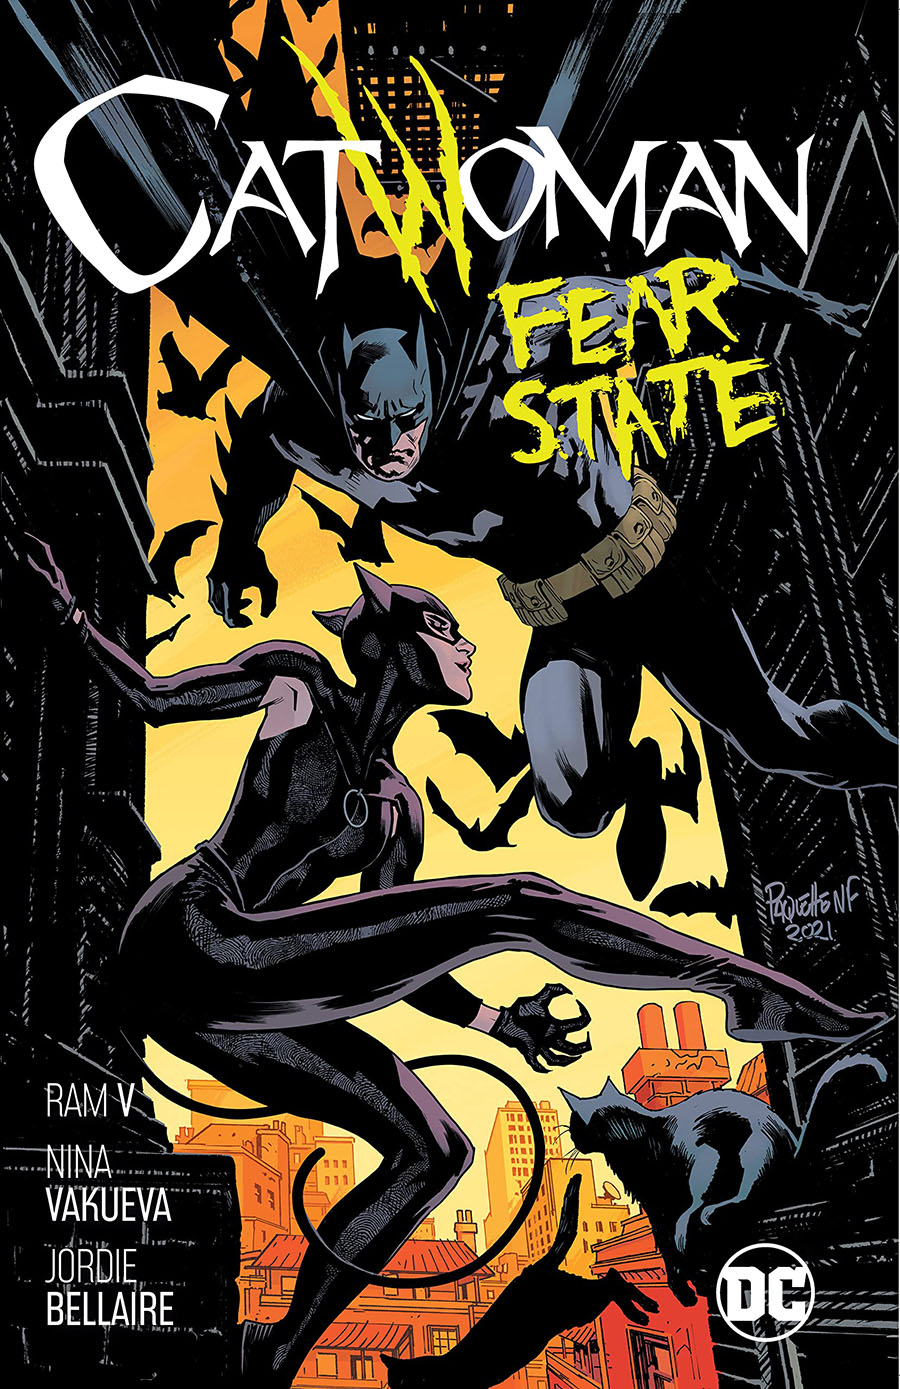 Catwoman (2018) Vol 6 Fear State TP